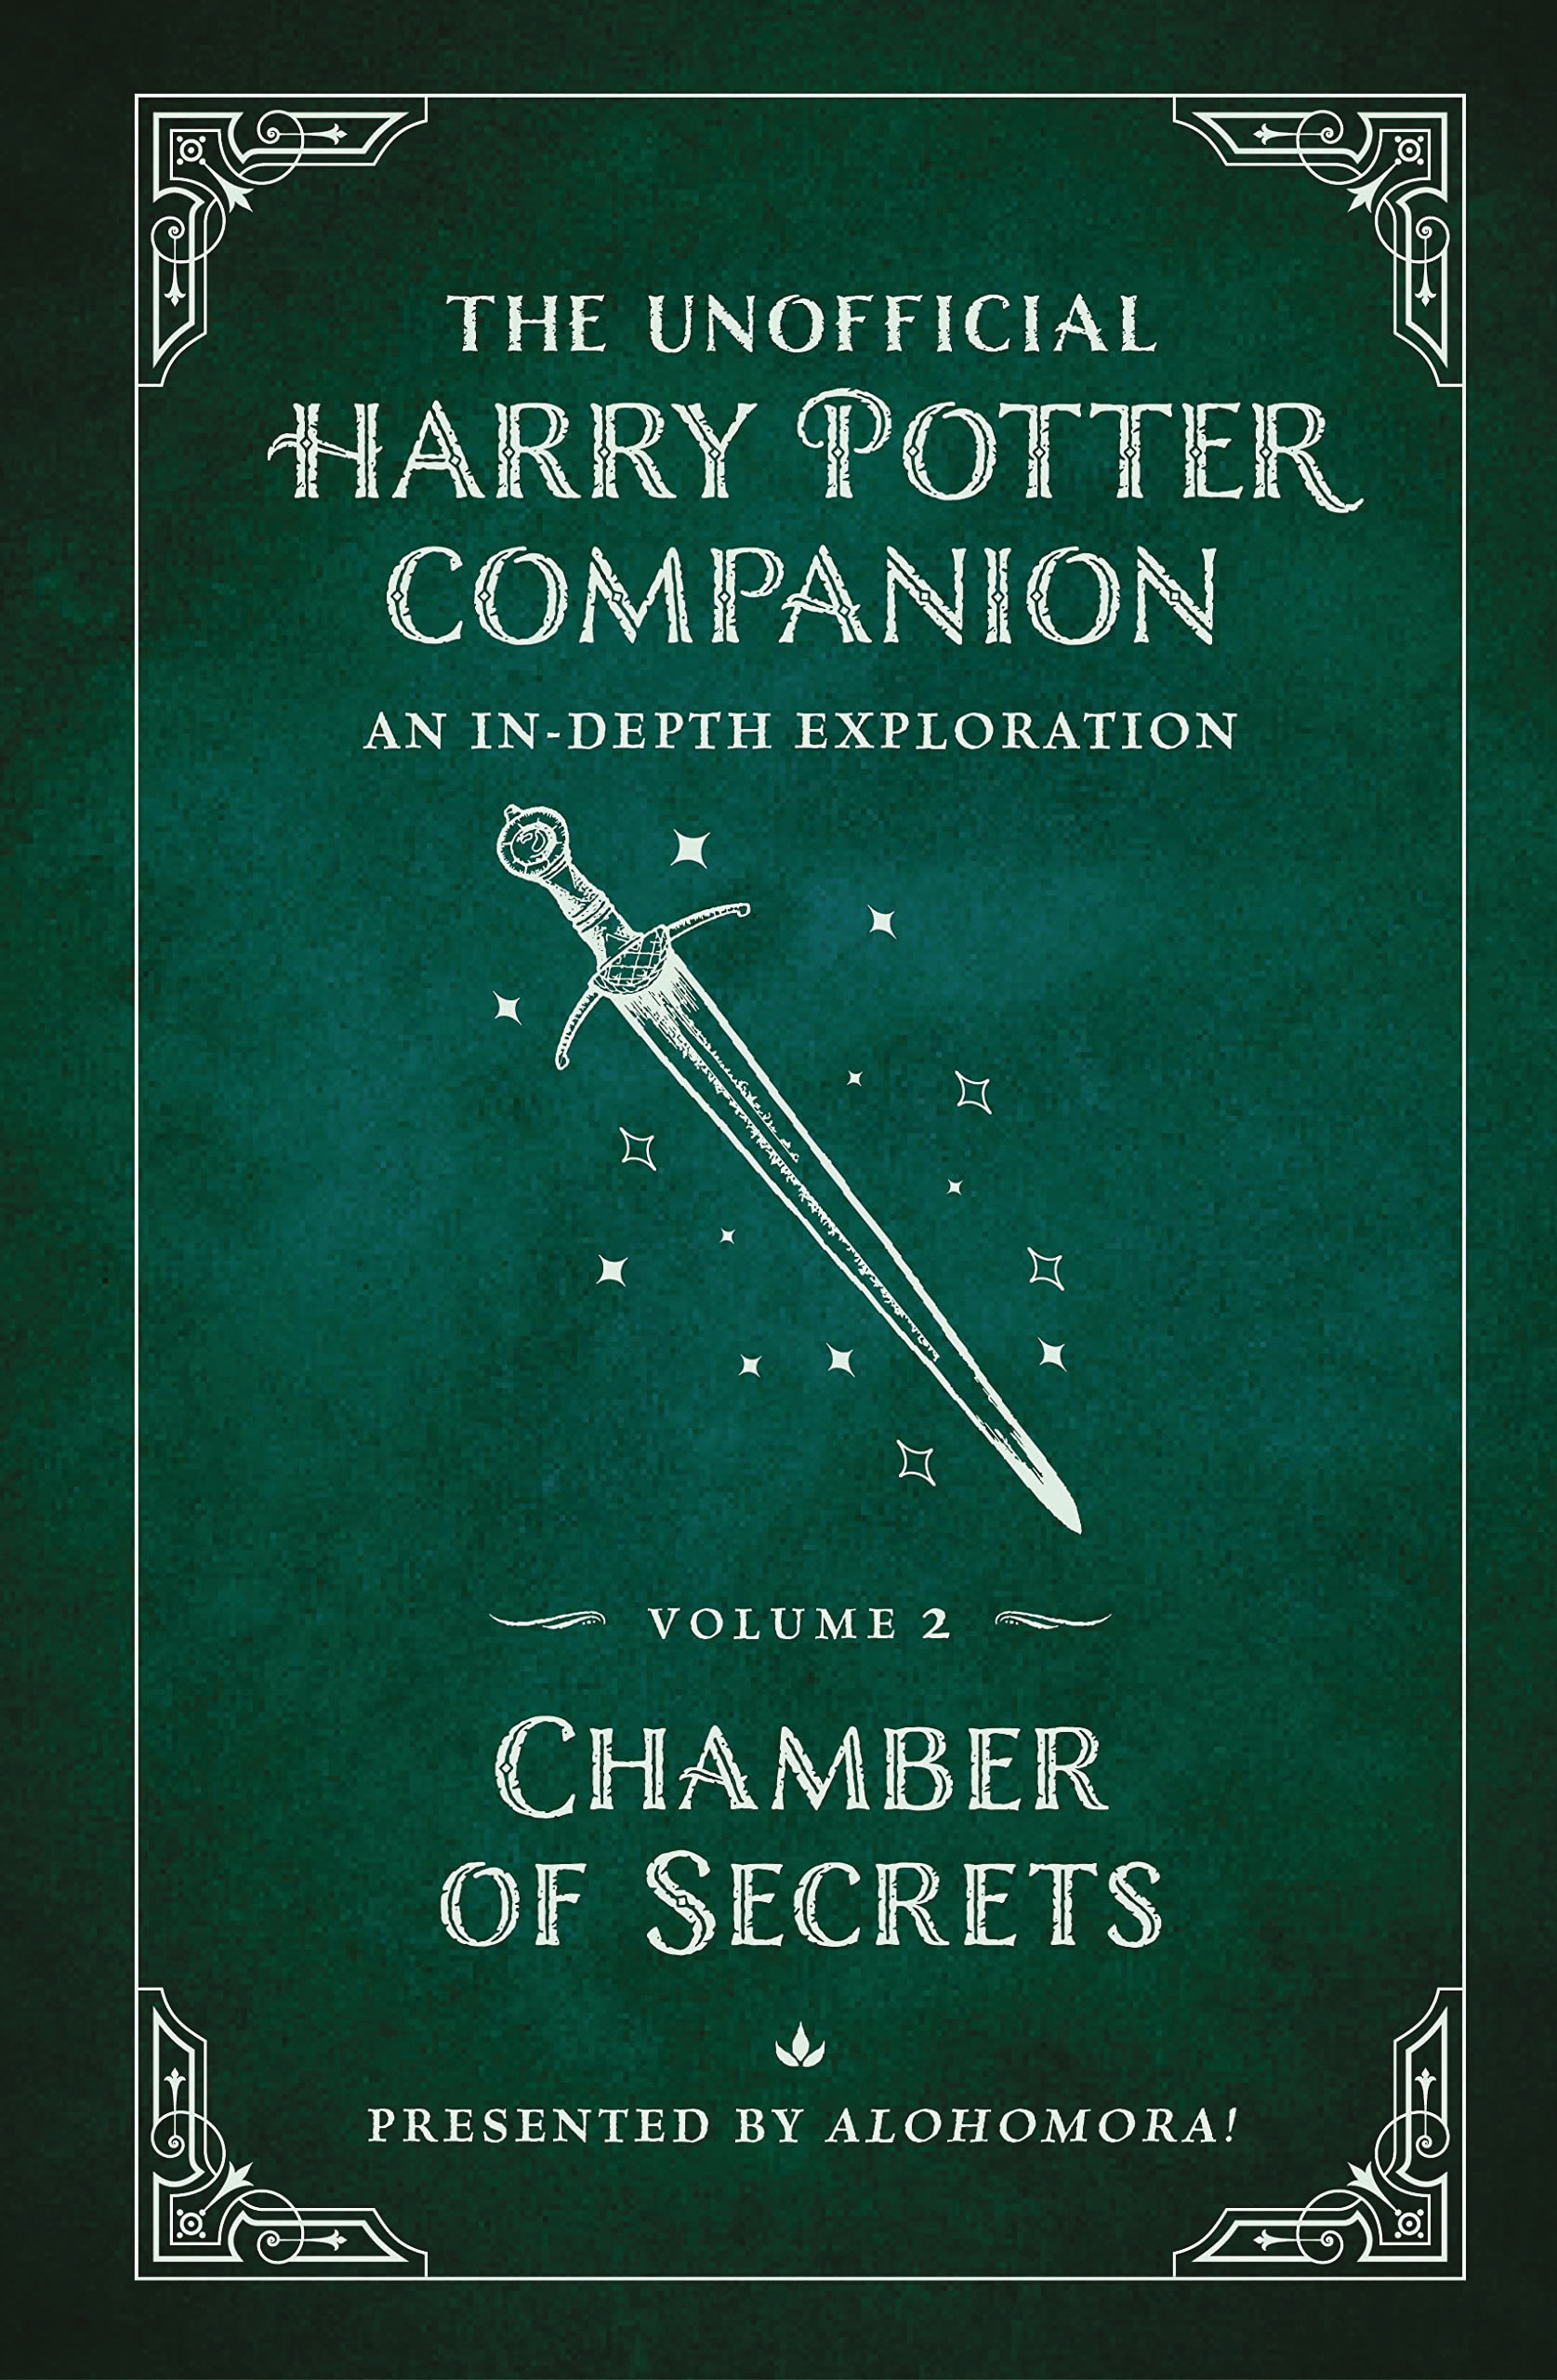 Unofficial Harry Potter Companion Hardcover Volume 2 Chamber of Secrets